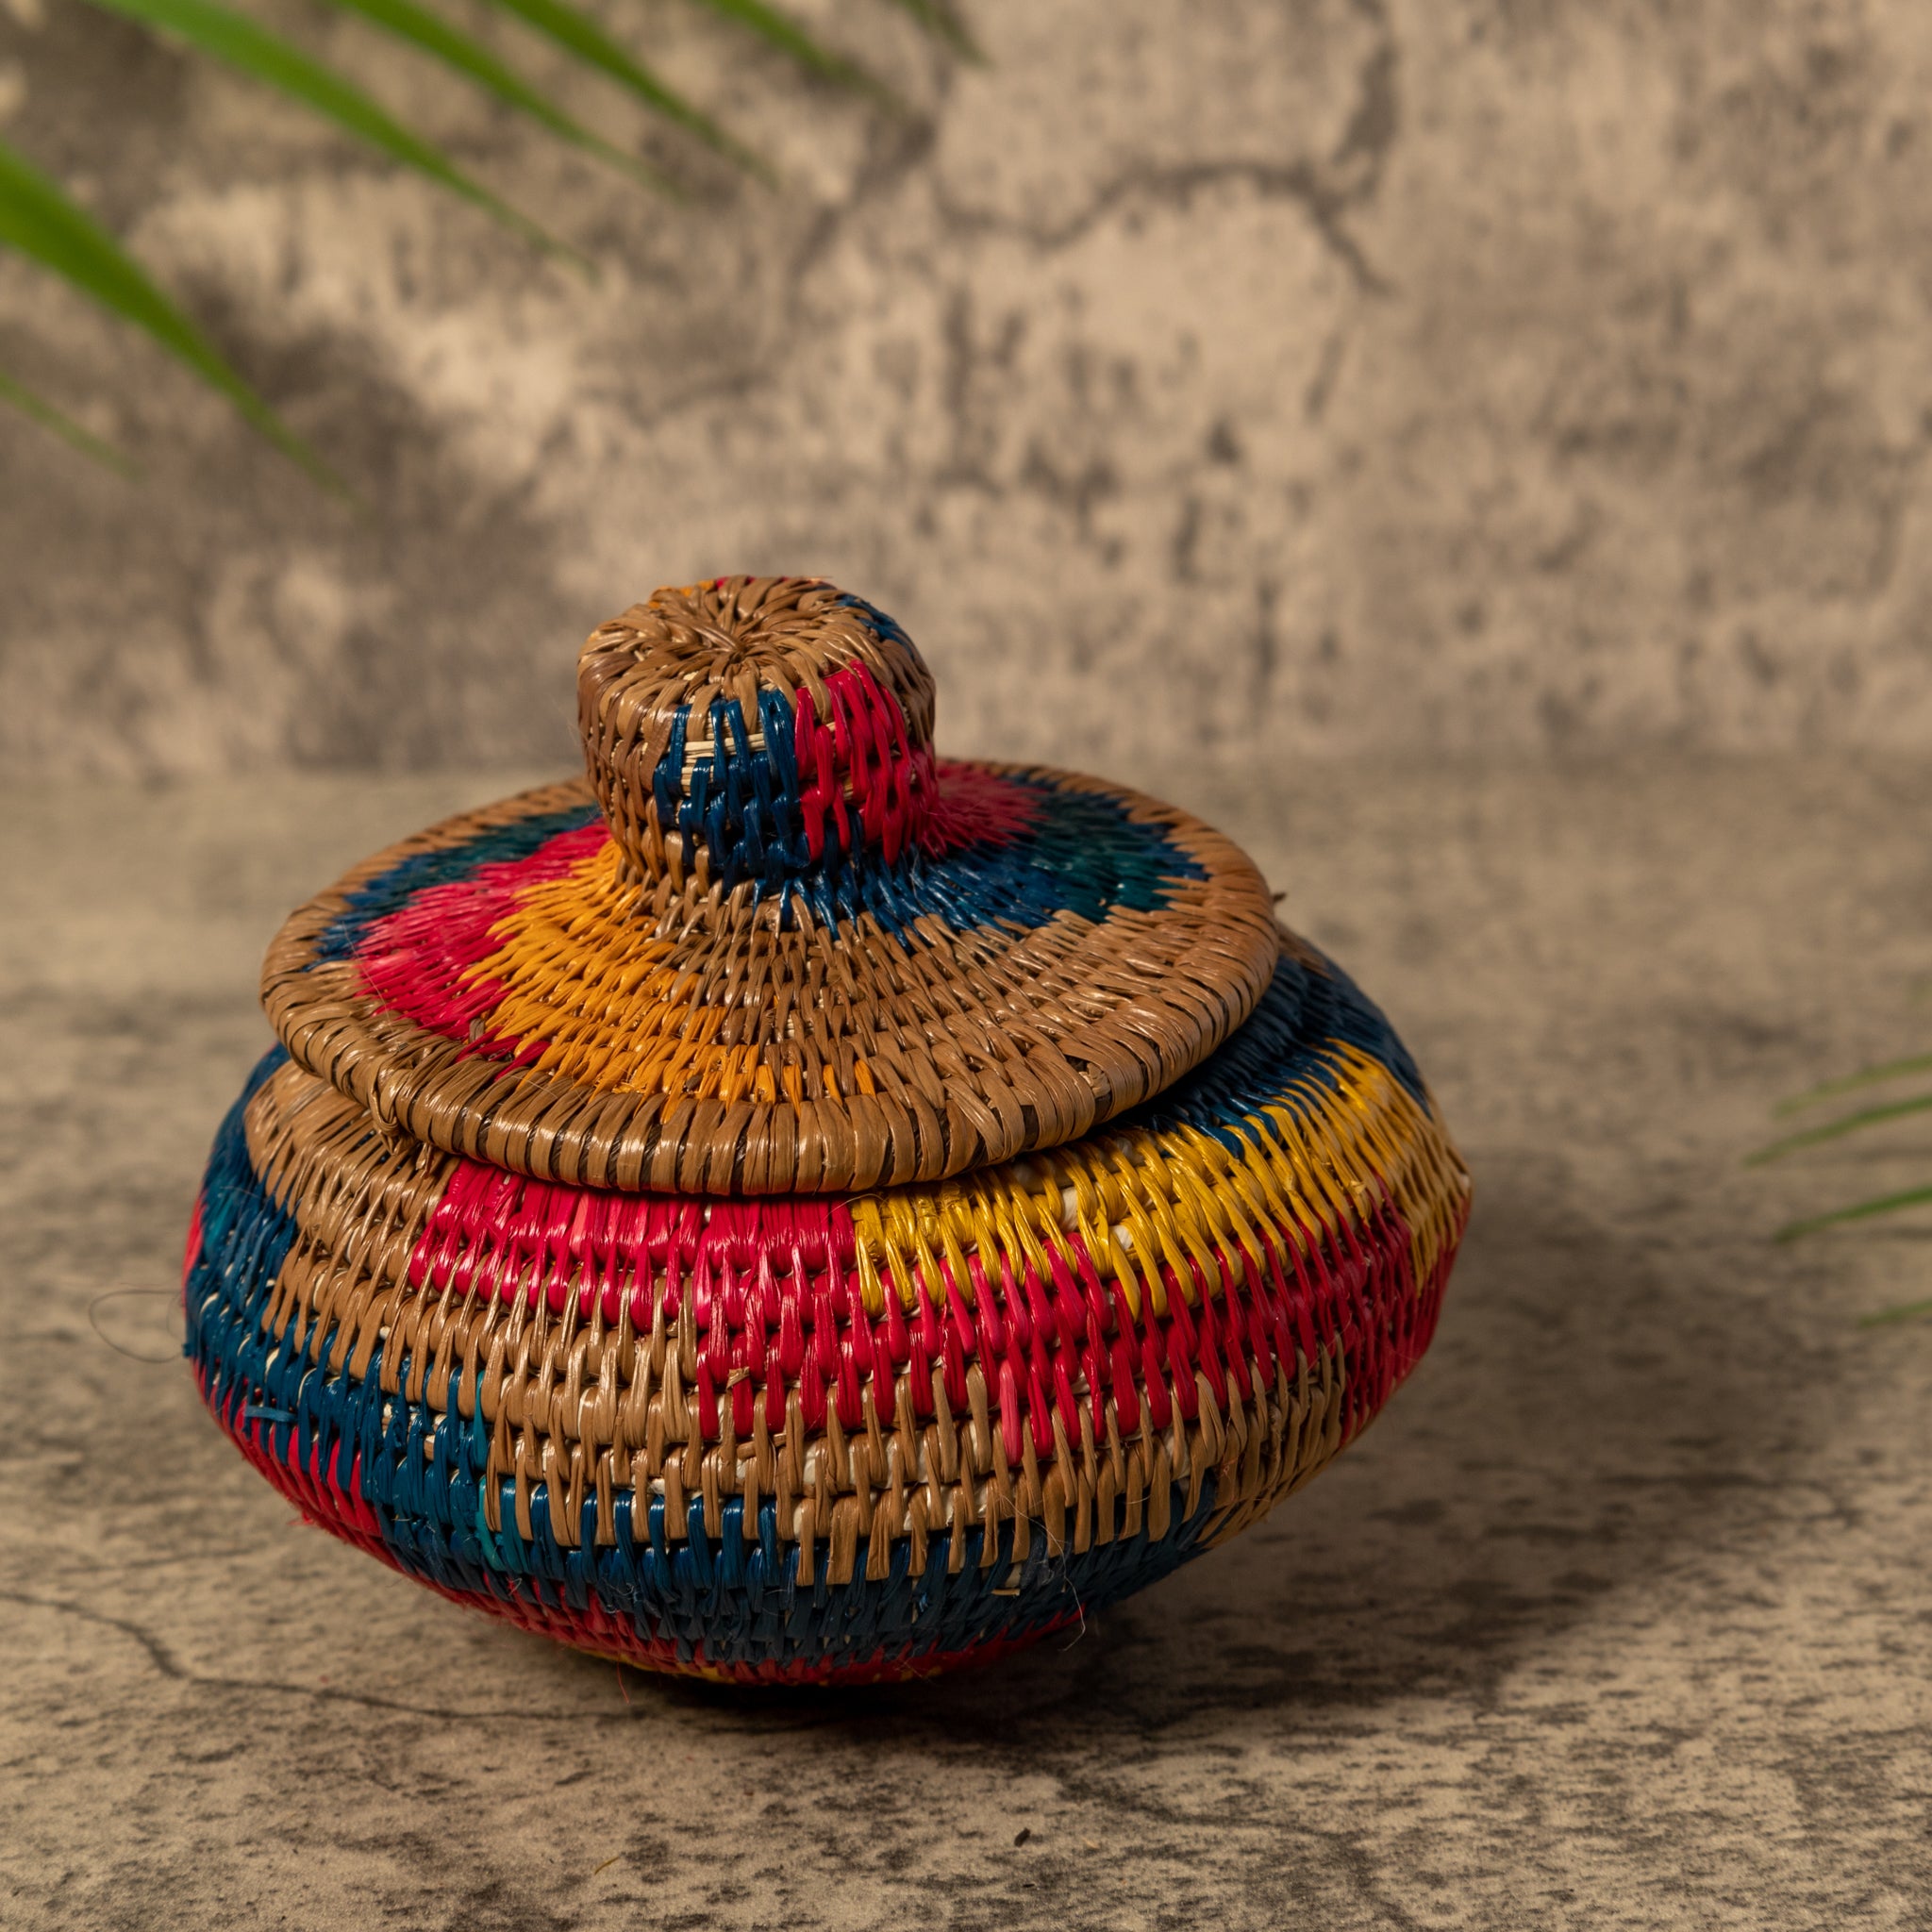 Rainbow of Colors Rainforest Basket With Top